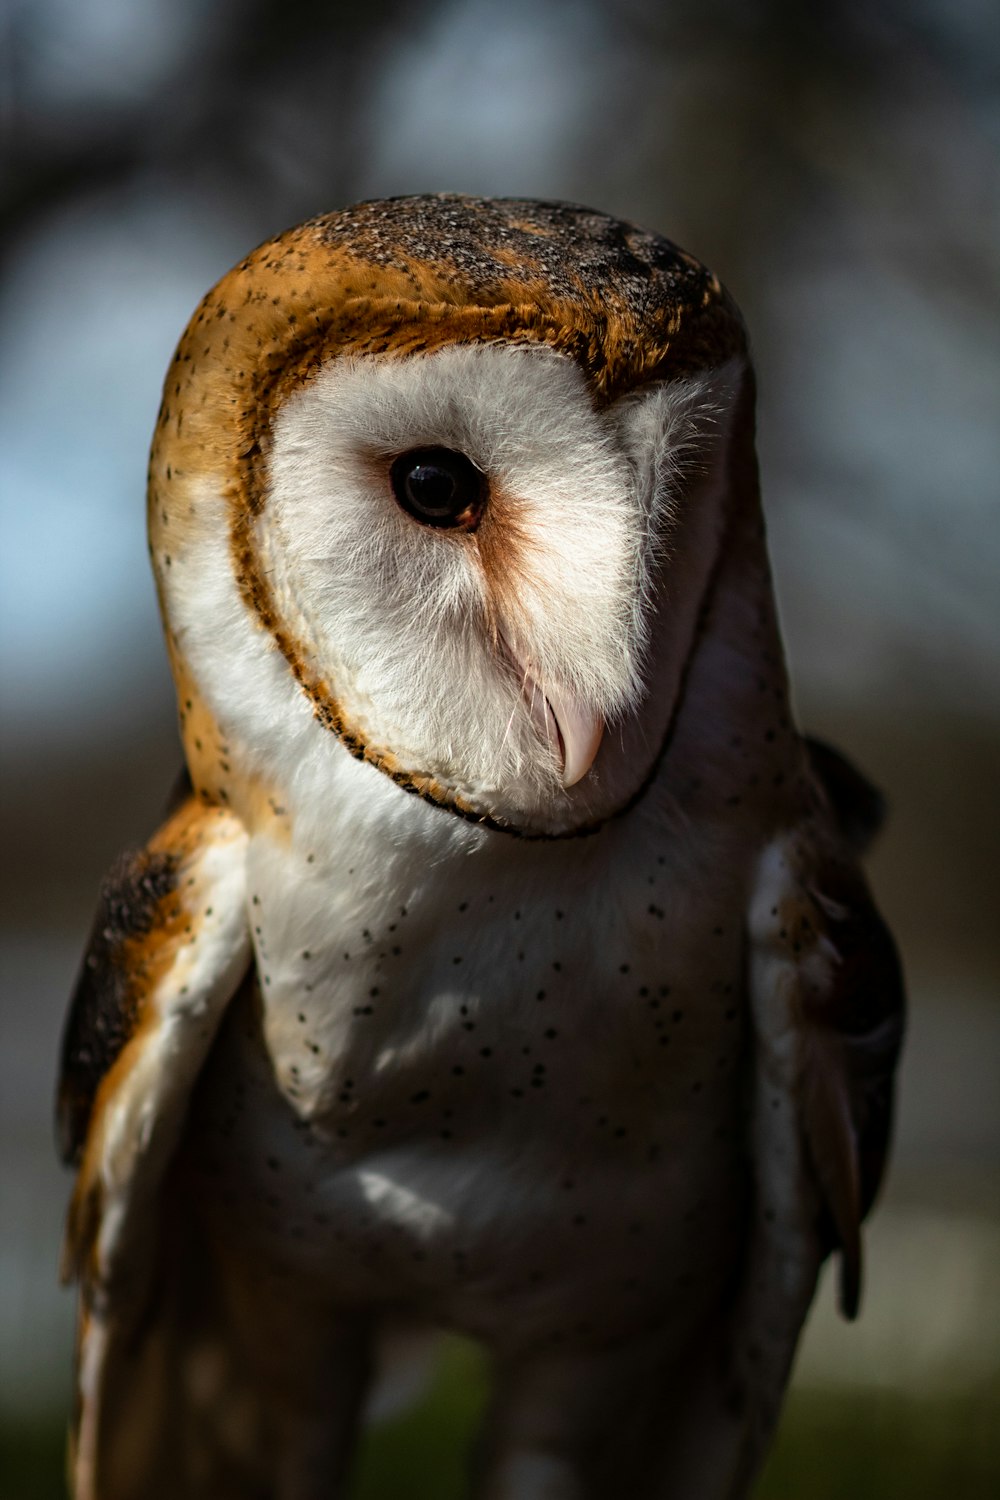 close-up of white and brown barn owl